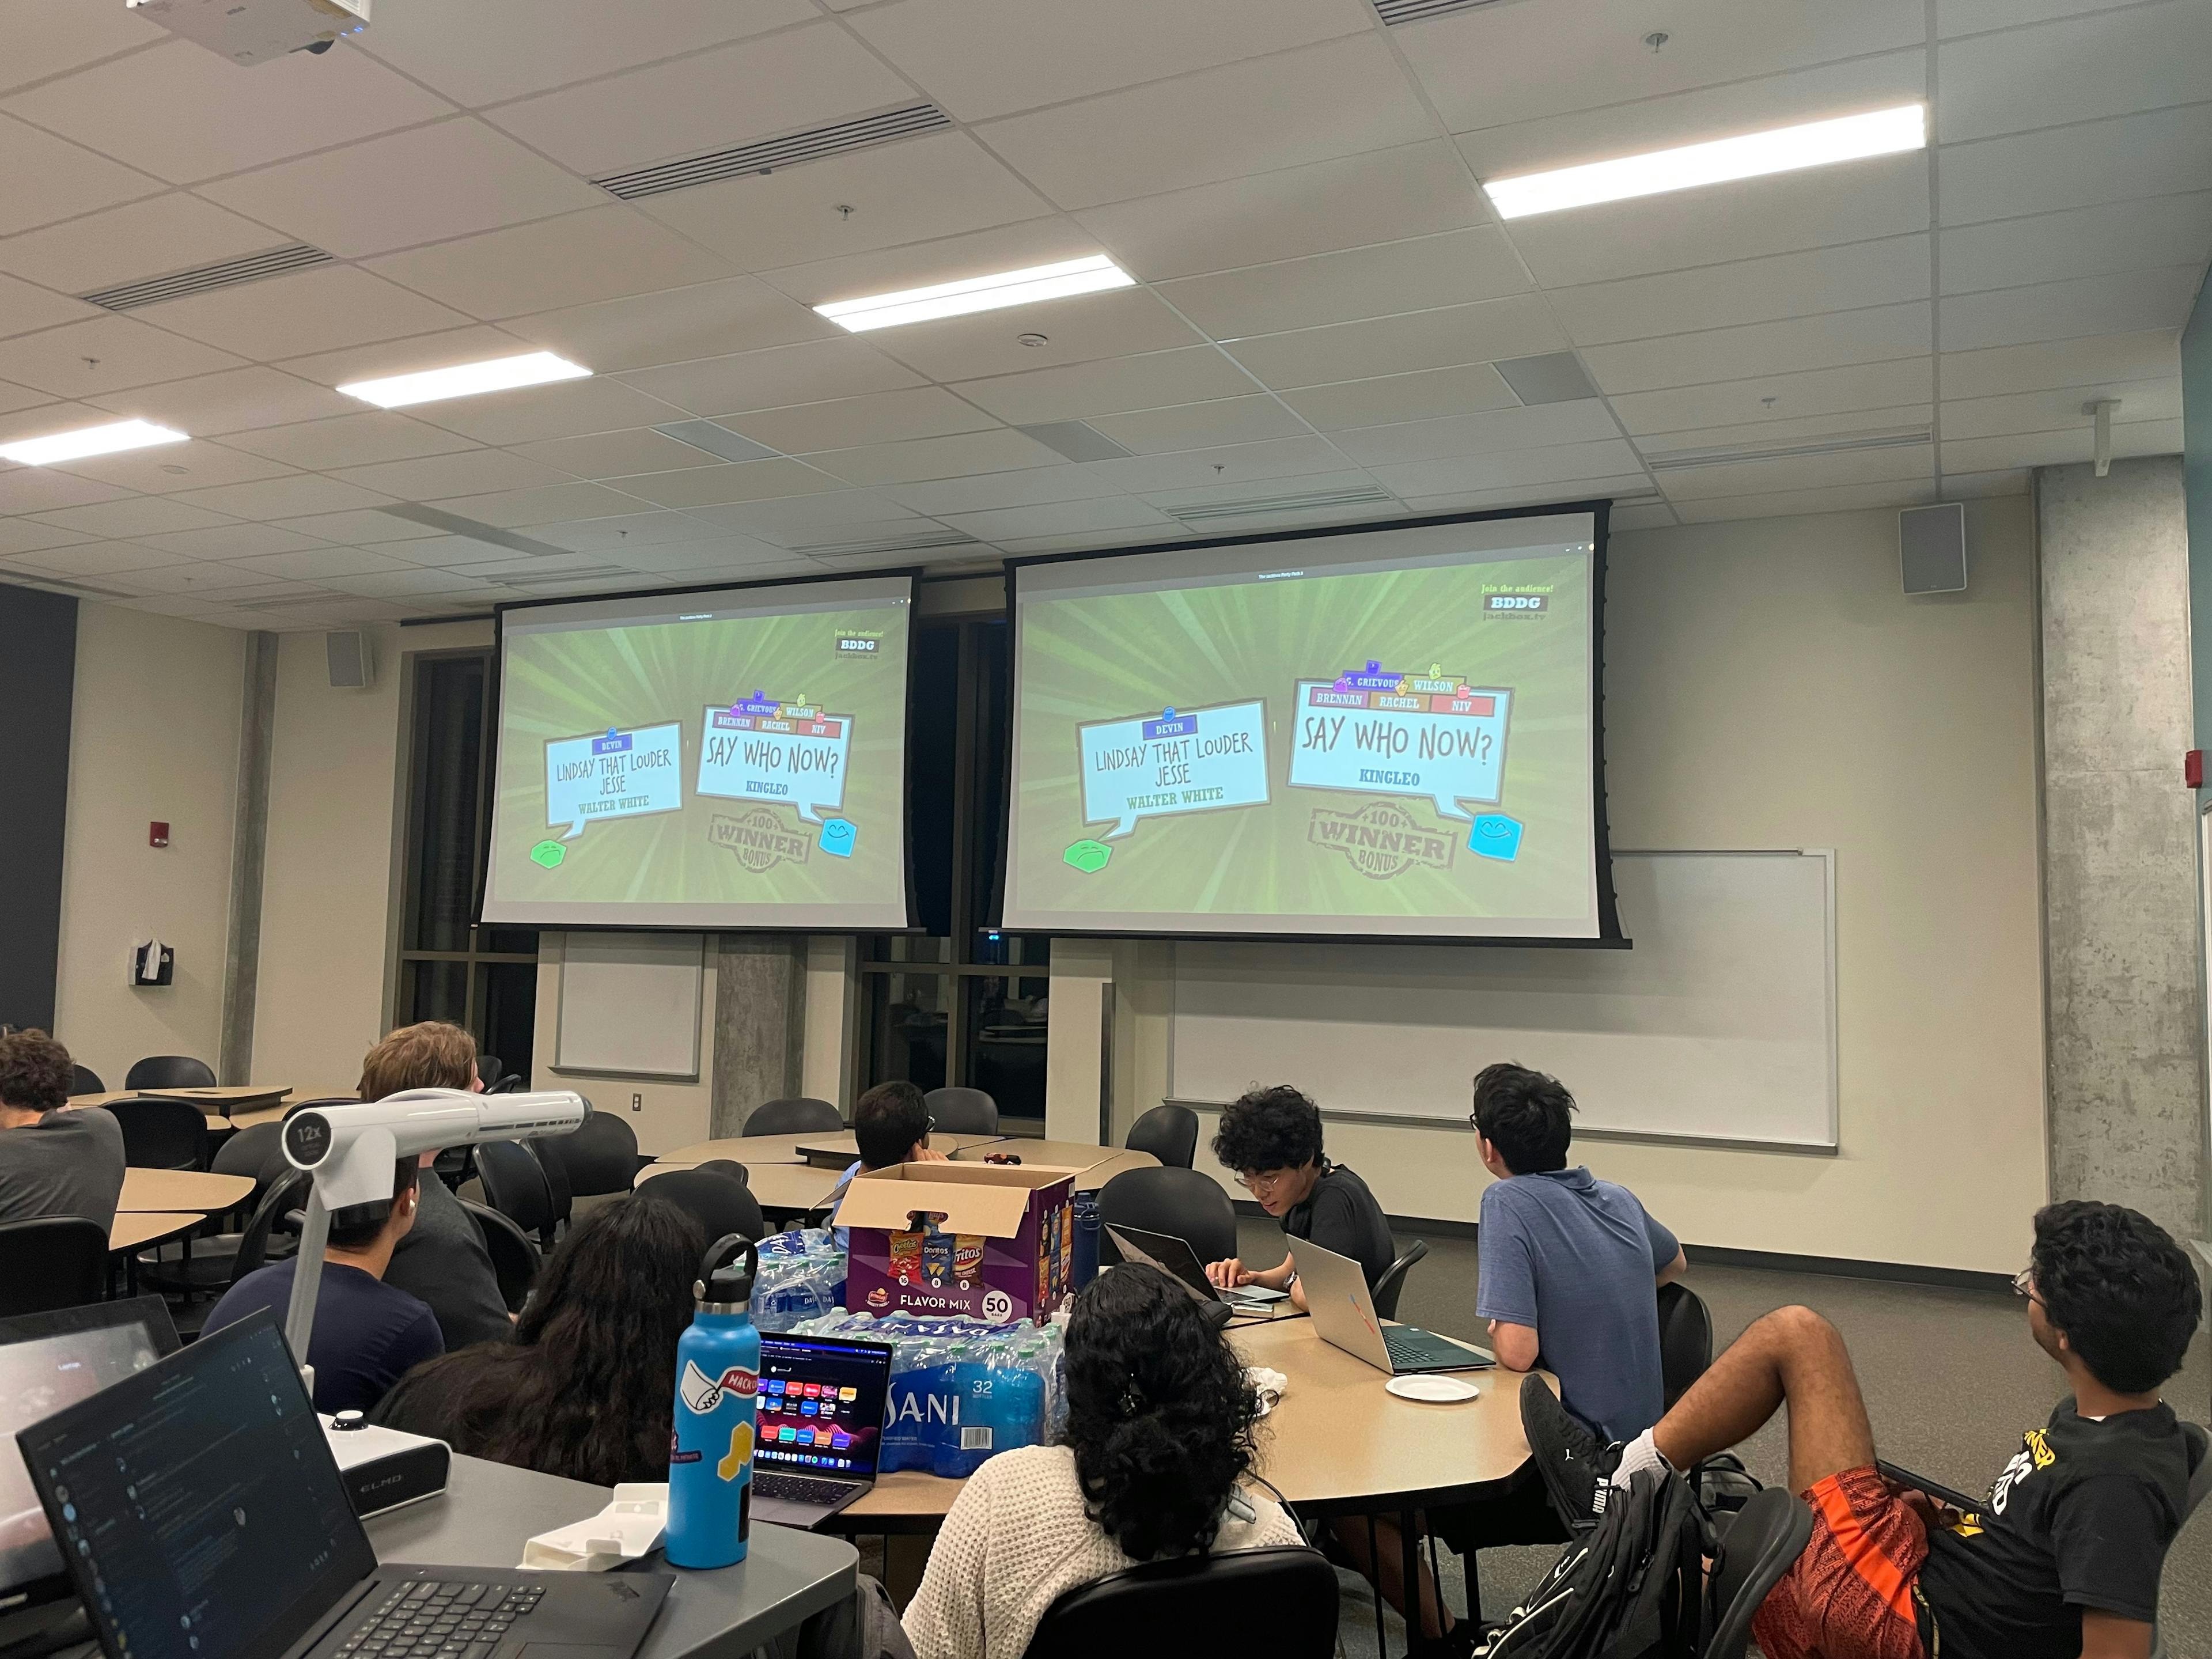 People sitting at tables in a large room, looking up at a projector screen which has a Jackbox Game playing